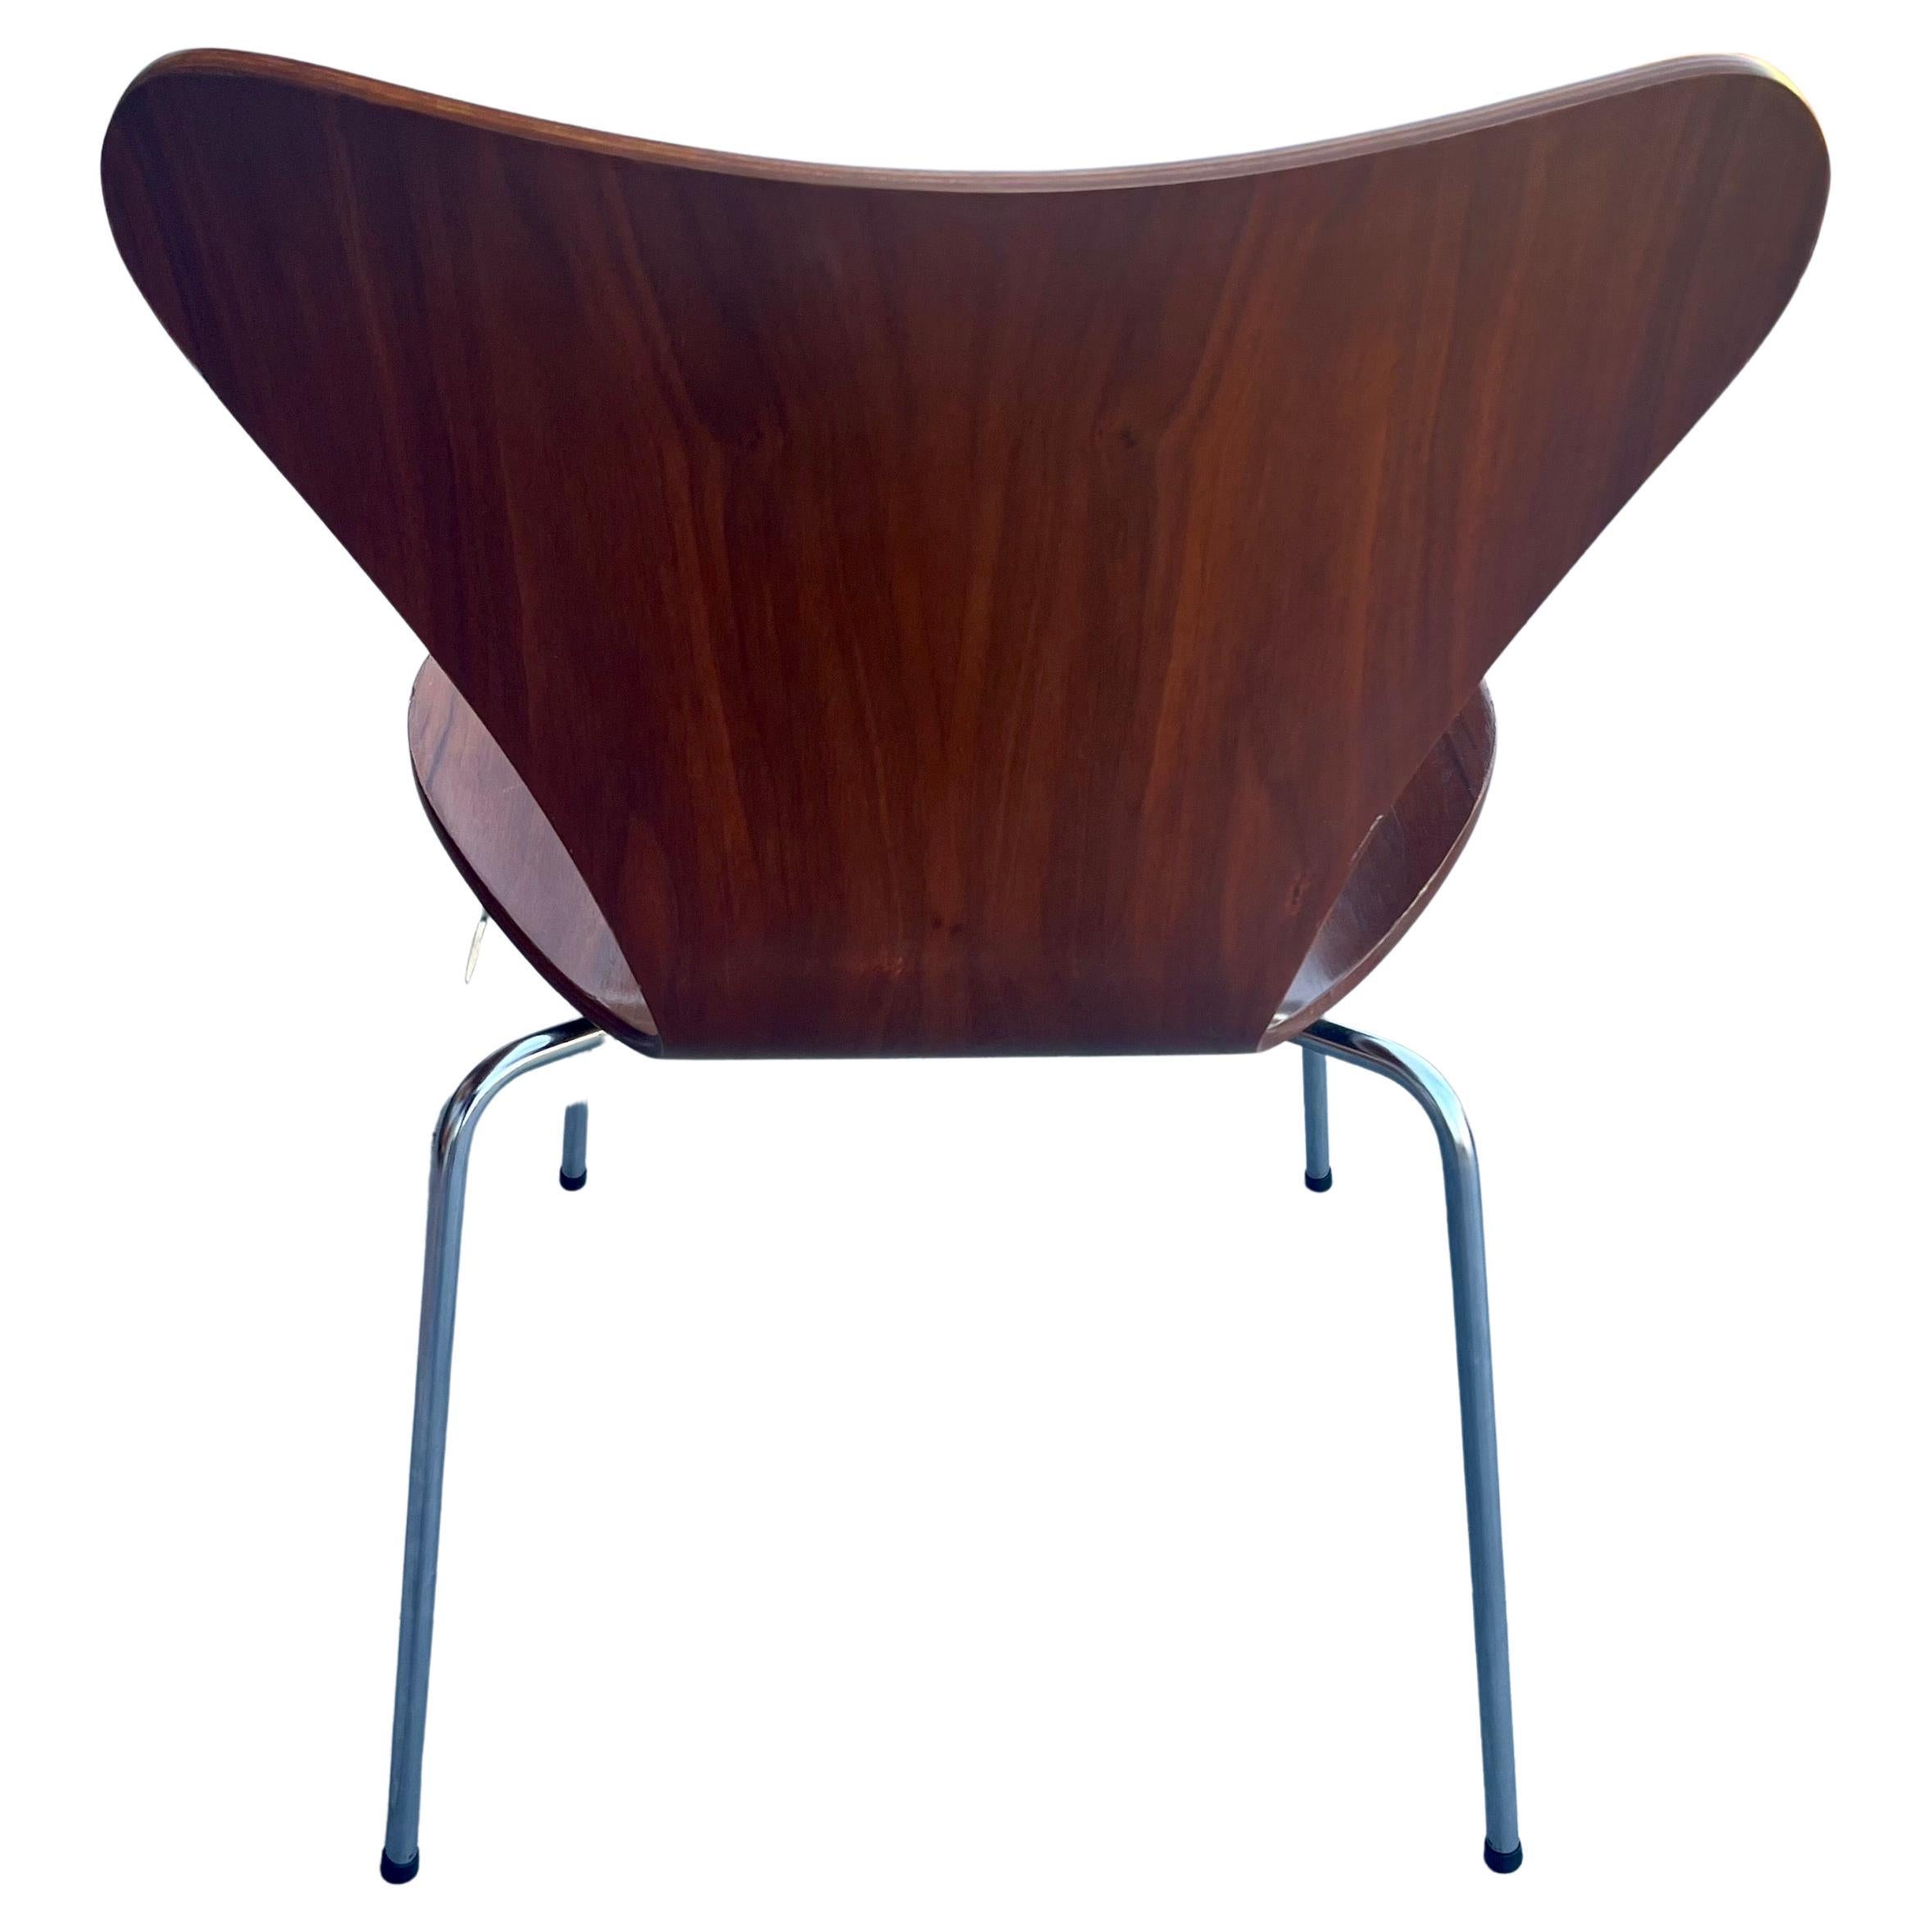 Beautiful series 7 chair designed by Arne Jacobsen, for Fritz Hansen in very nice and clean condition. nice dark teak finish very clean solid and sturdy. Comes with its original plastic feet.